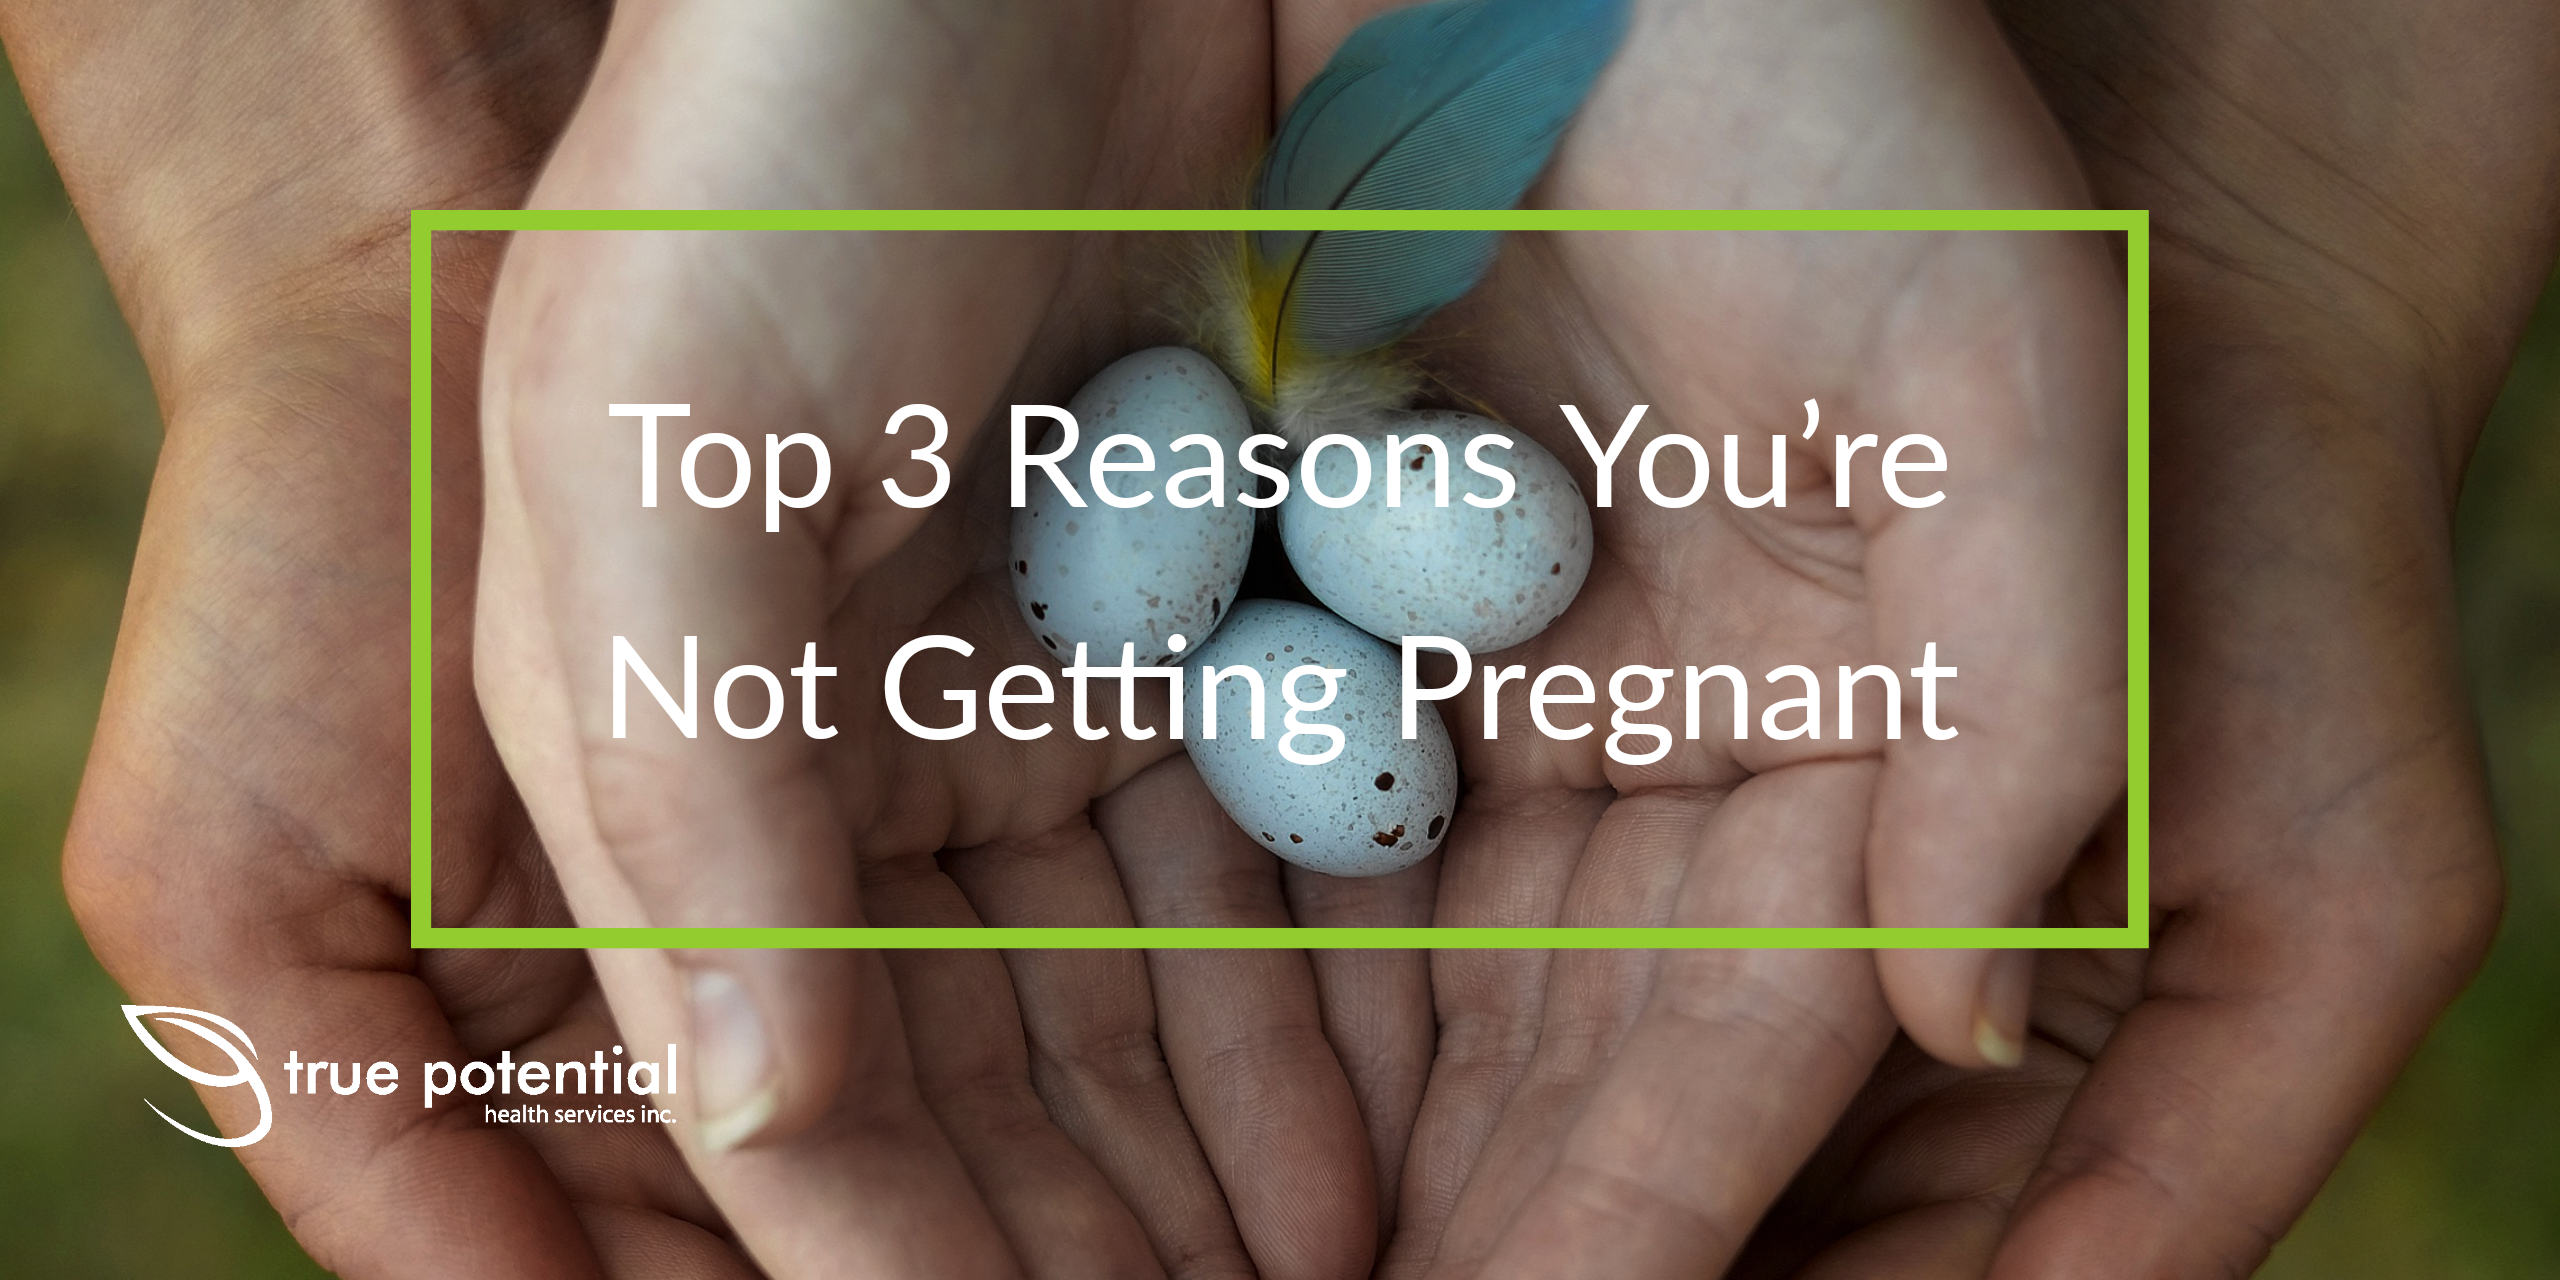 Top 3 Reasons You're Not Getting Pregnant